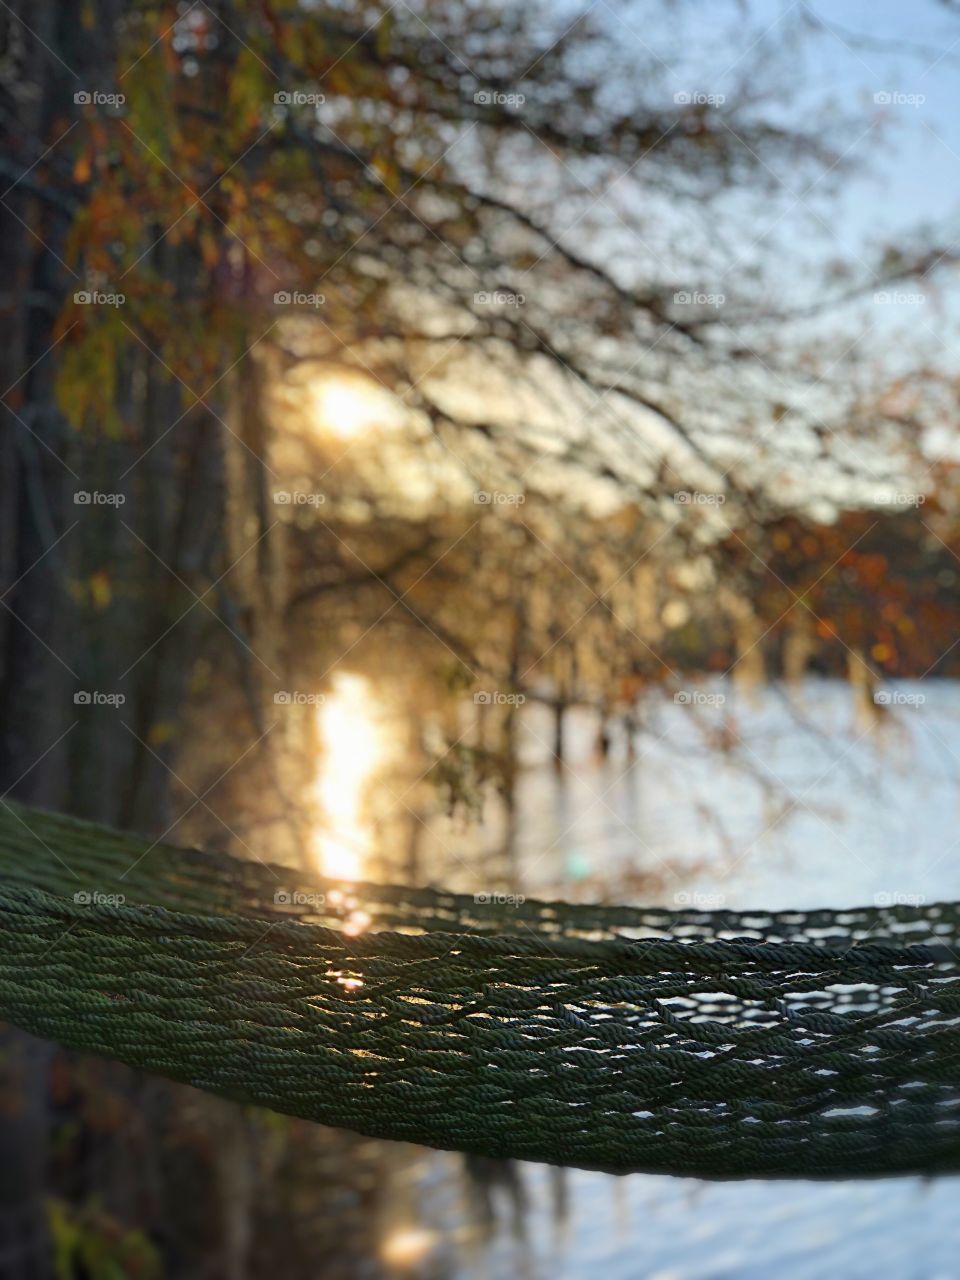 Fall colors and a hammock by the lake.
